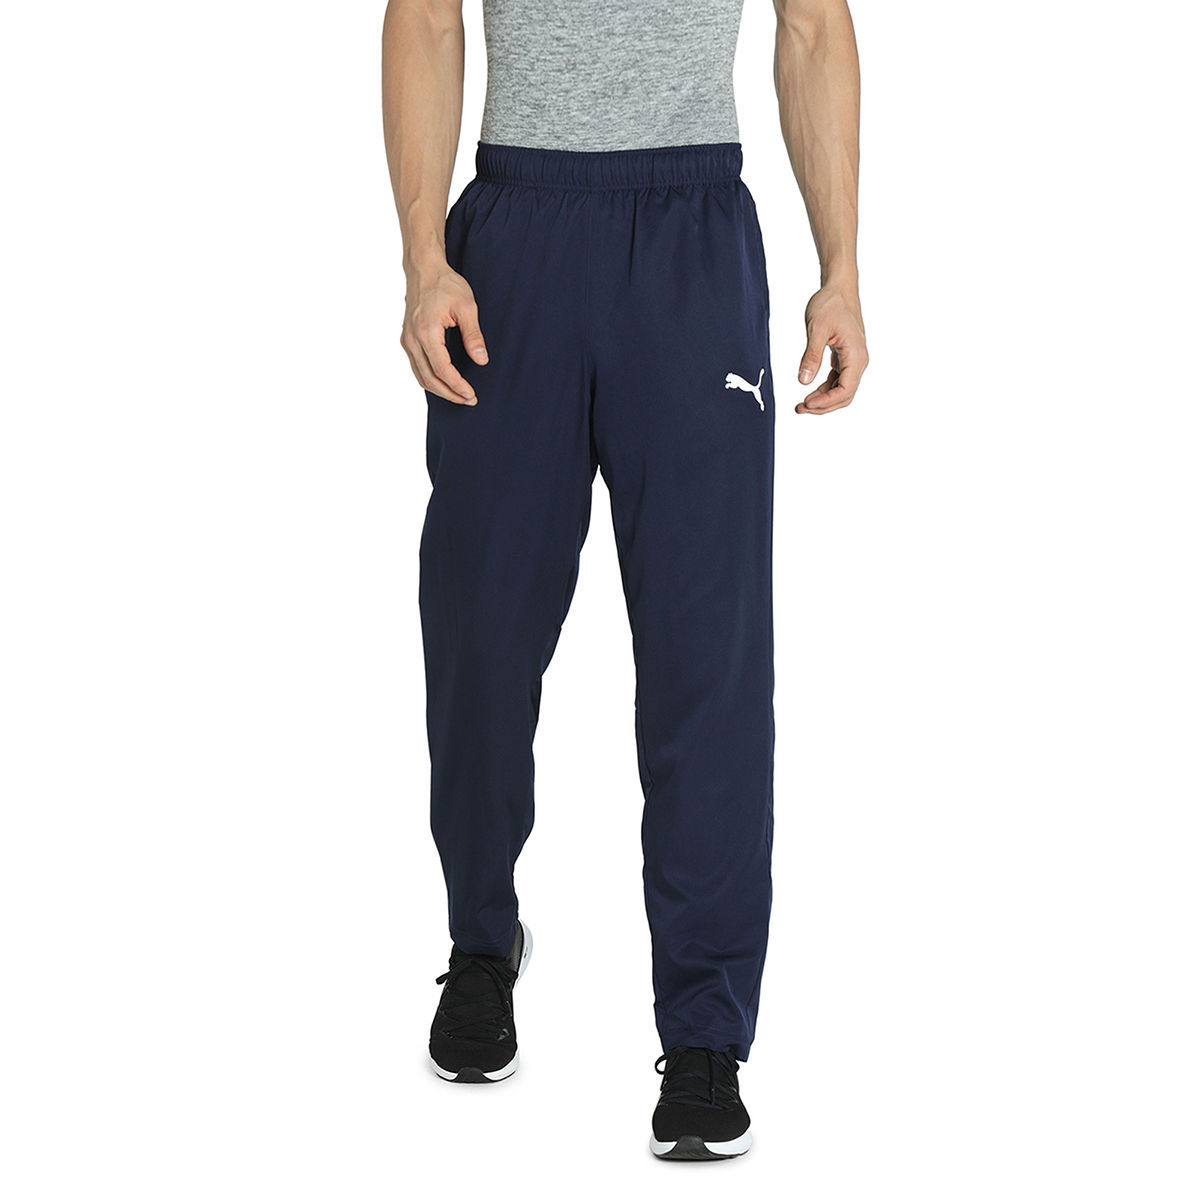 Puma ACTIVE Woven Mens Navy Blue Casual Track Pant (S)